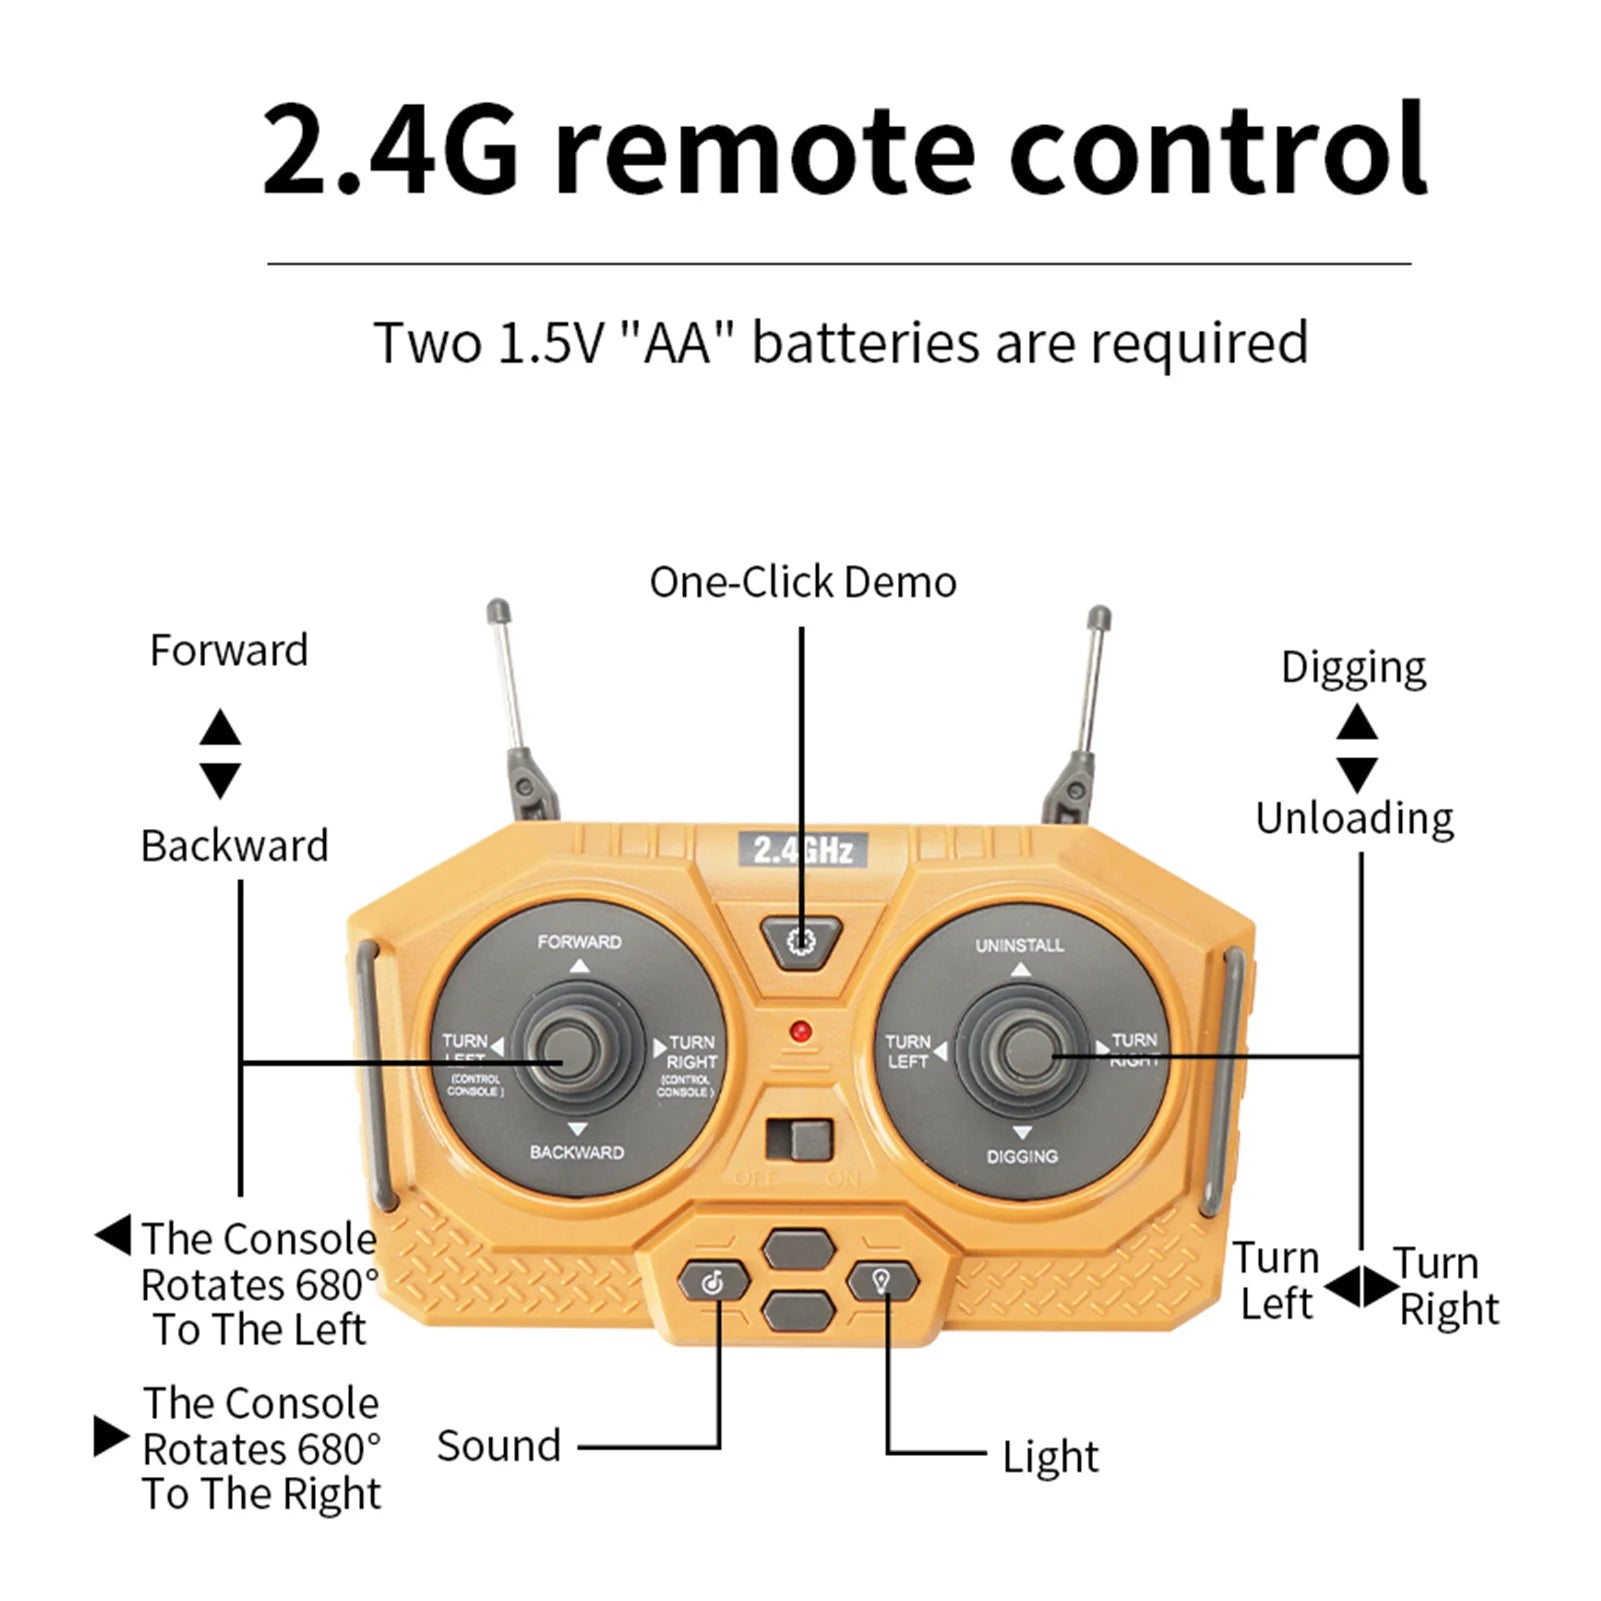 2.46 remote control Two 1.5V "AA" batteries are required One-Click Demo Forward